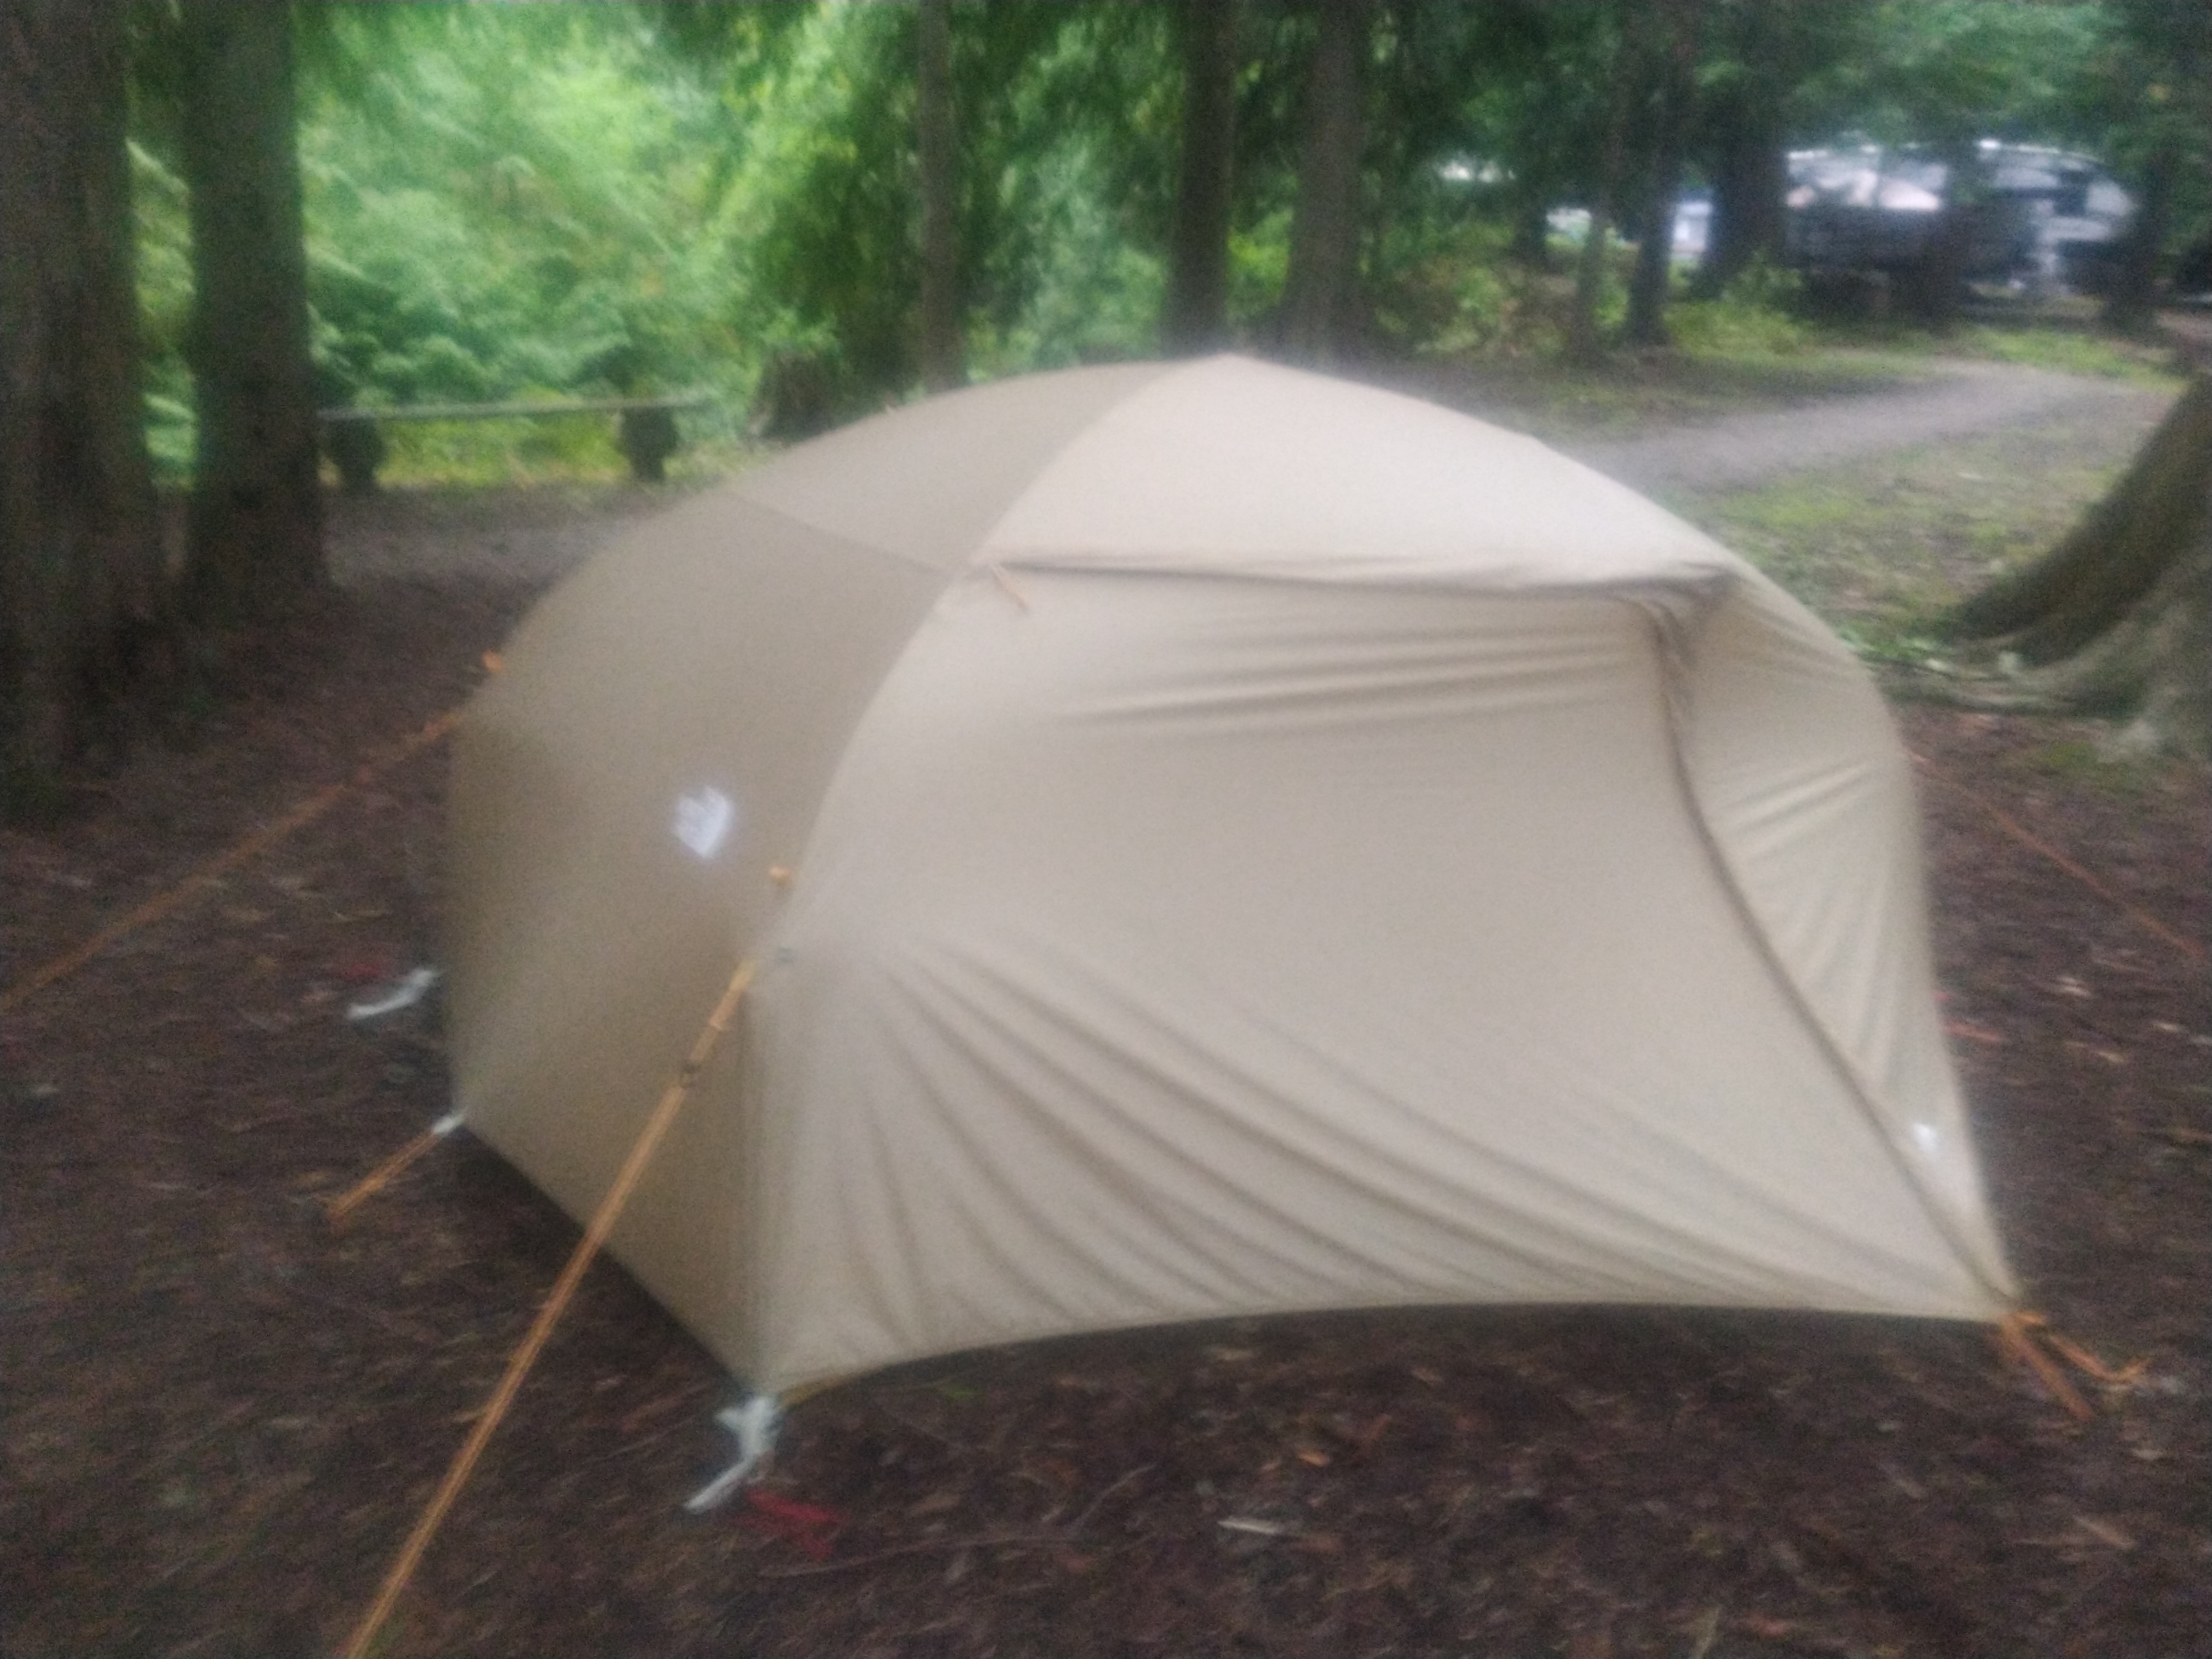 North face's Trail lite 2 tent review